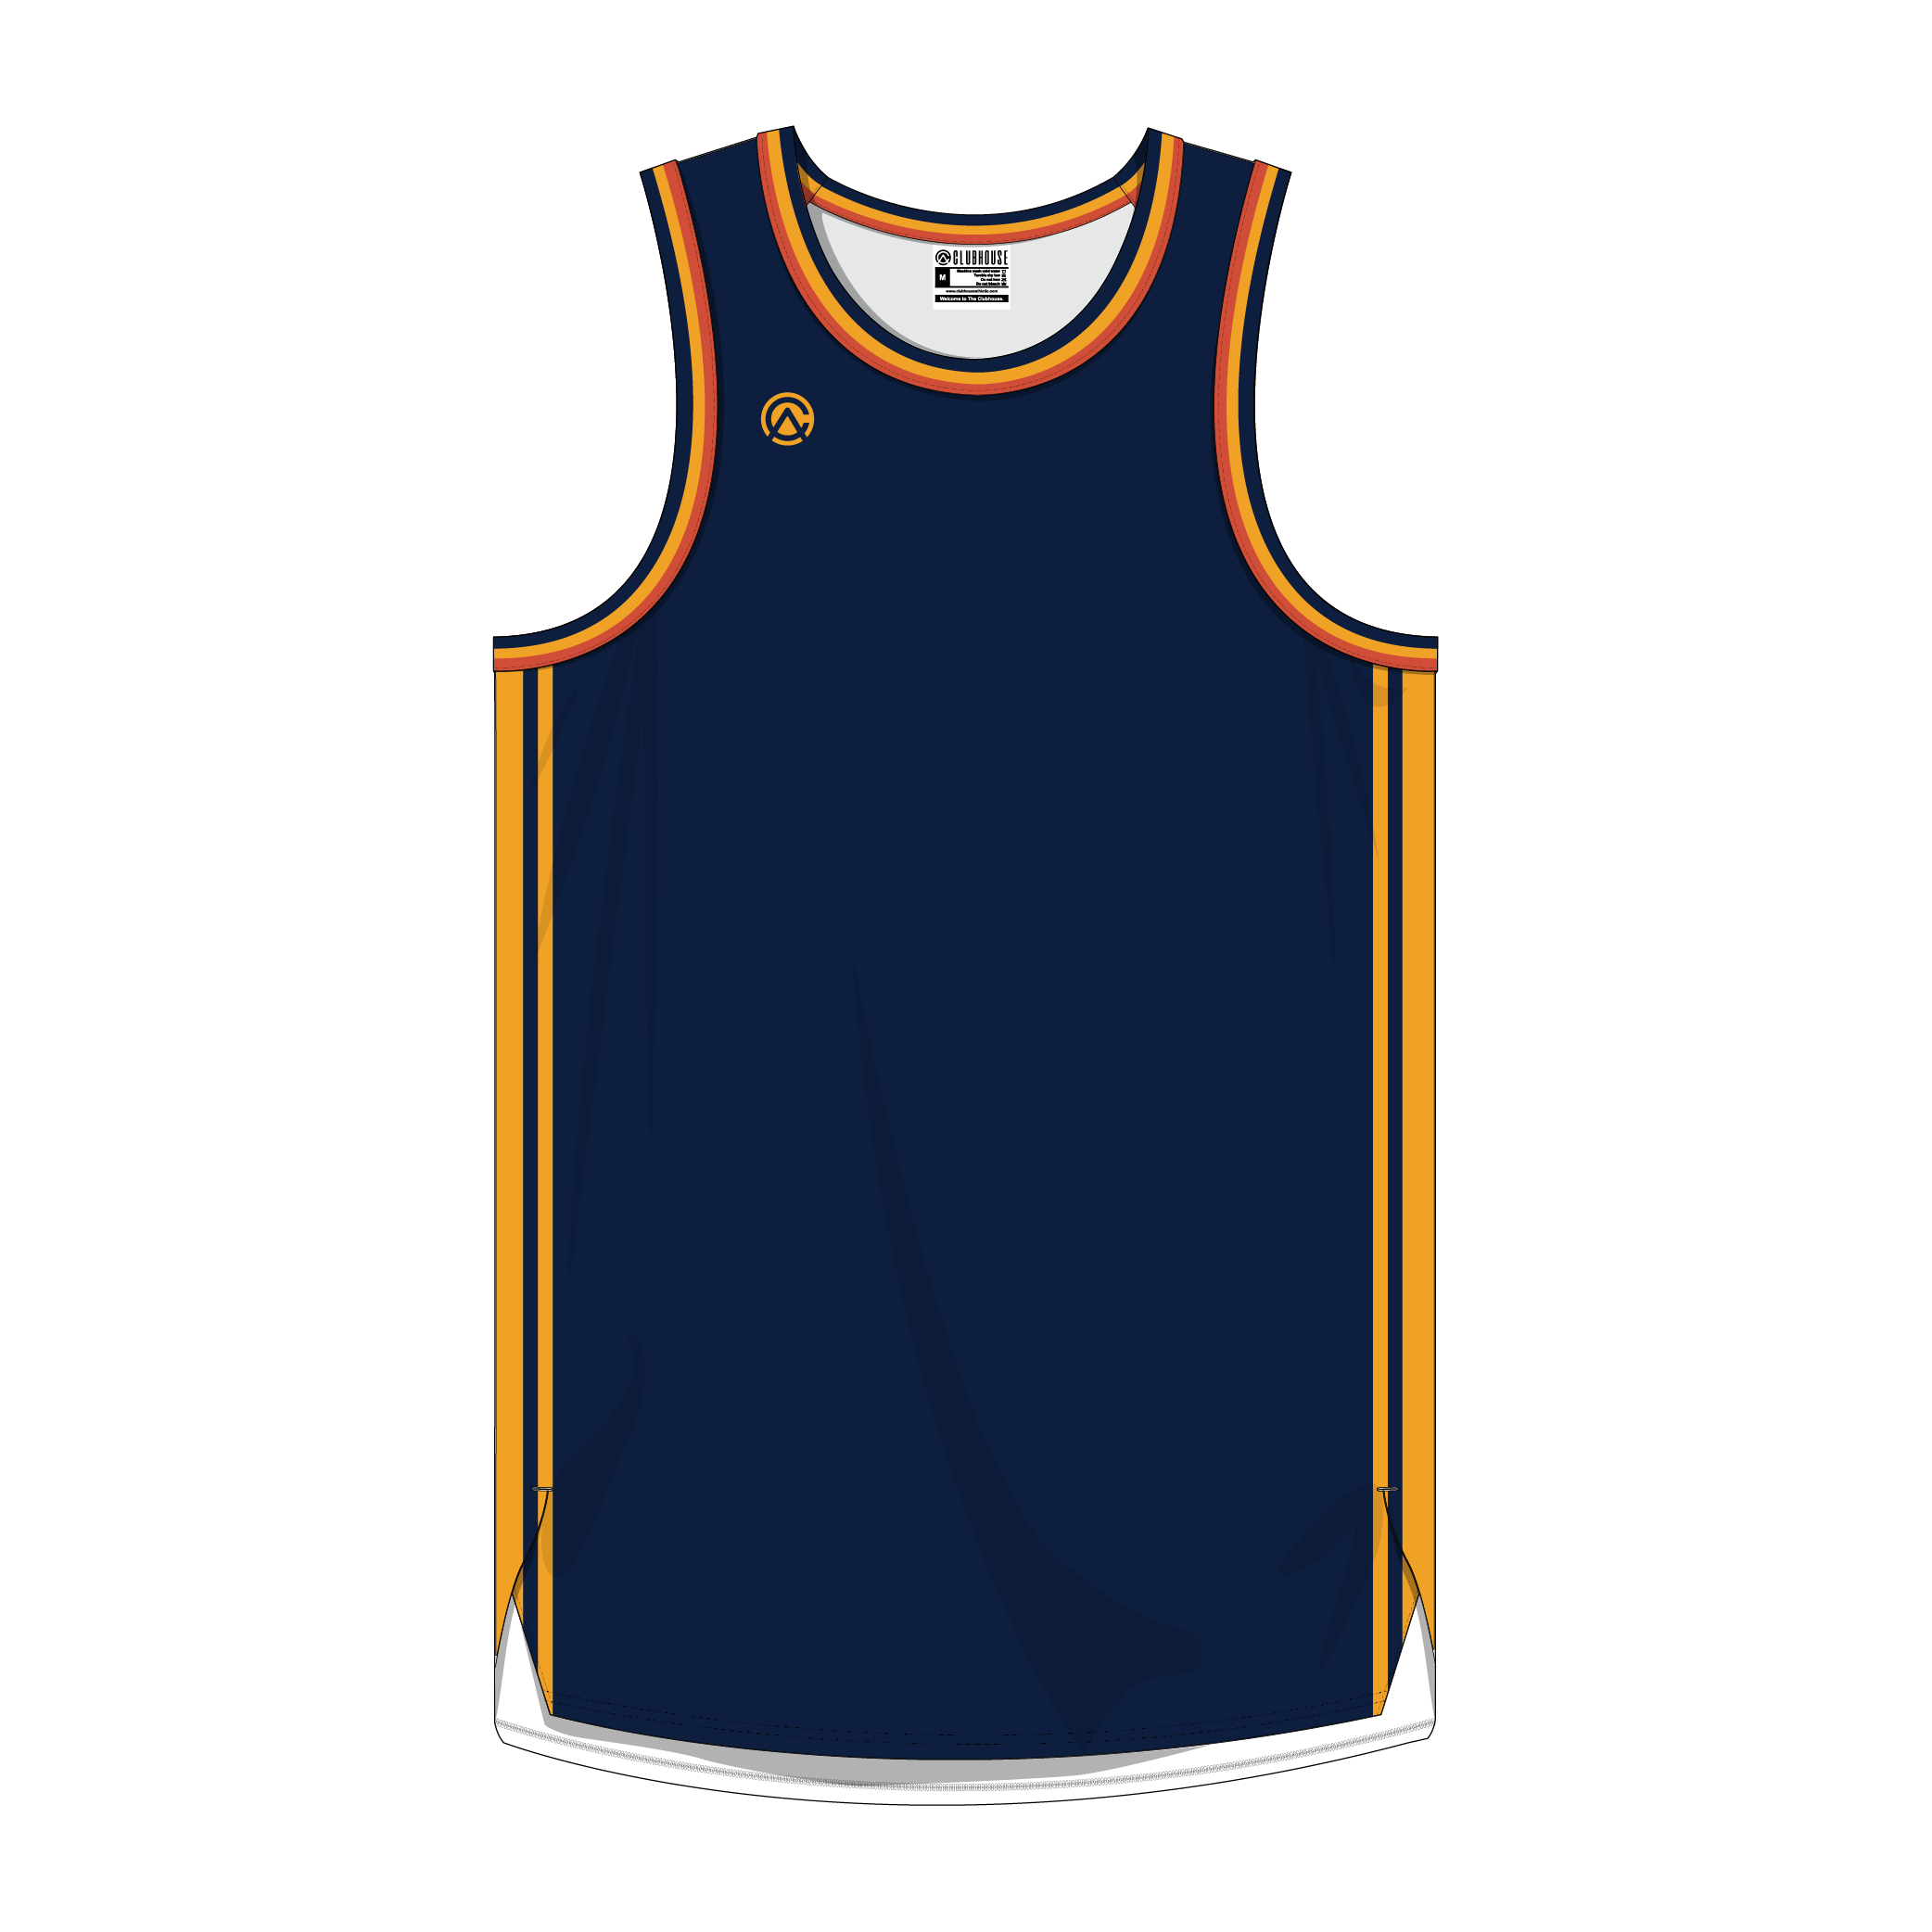 Clubhouse Original: Retro Golden State Basketball Jersey